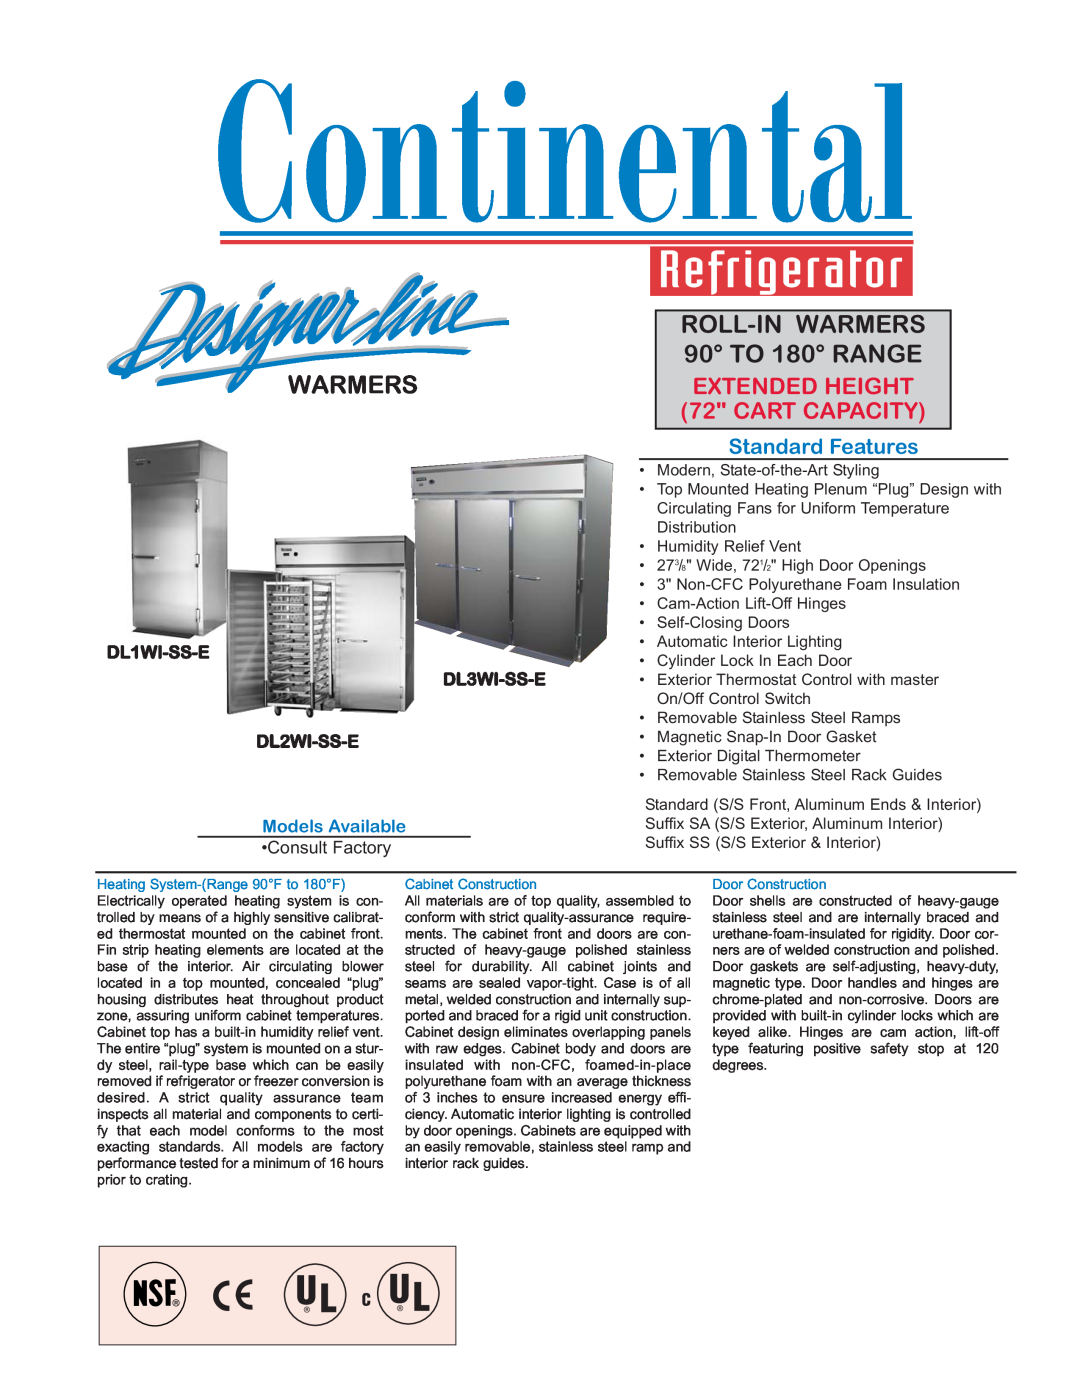 Continental DL3WI-SS-E manual DL1WI-SS-E, DL2WI-SS-E, Consult Factory, Warmers, ROLL-INWARMERS 90 TO 180 RANGE 